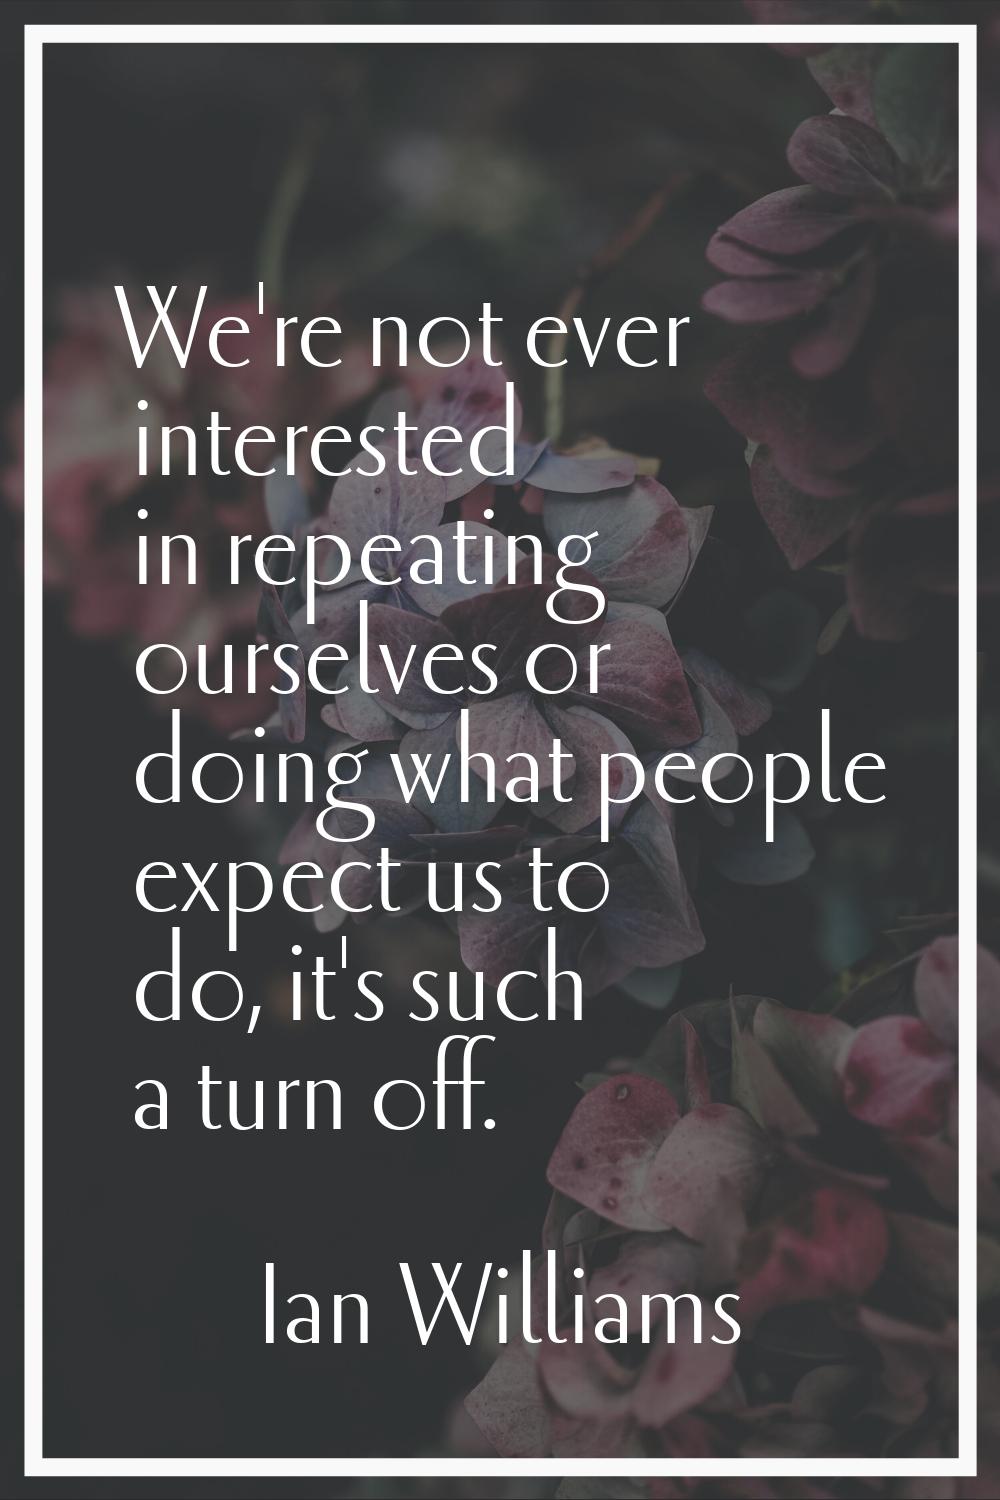 We're not ever interested in repeating ourselves or doing what people expect us to do, it's such a 